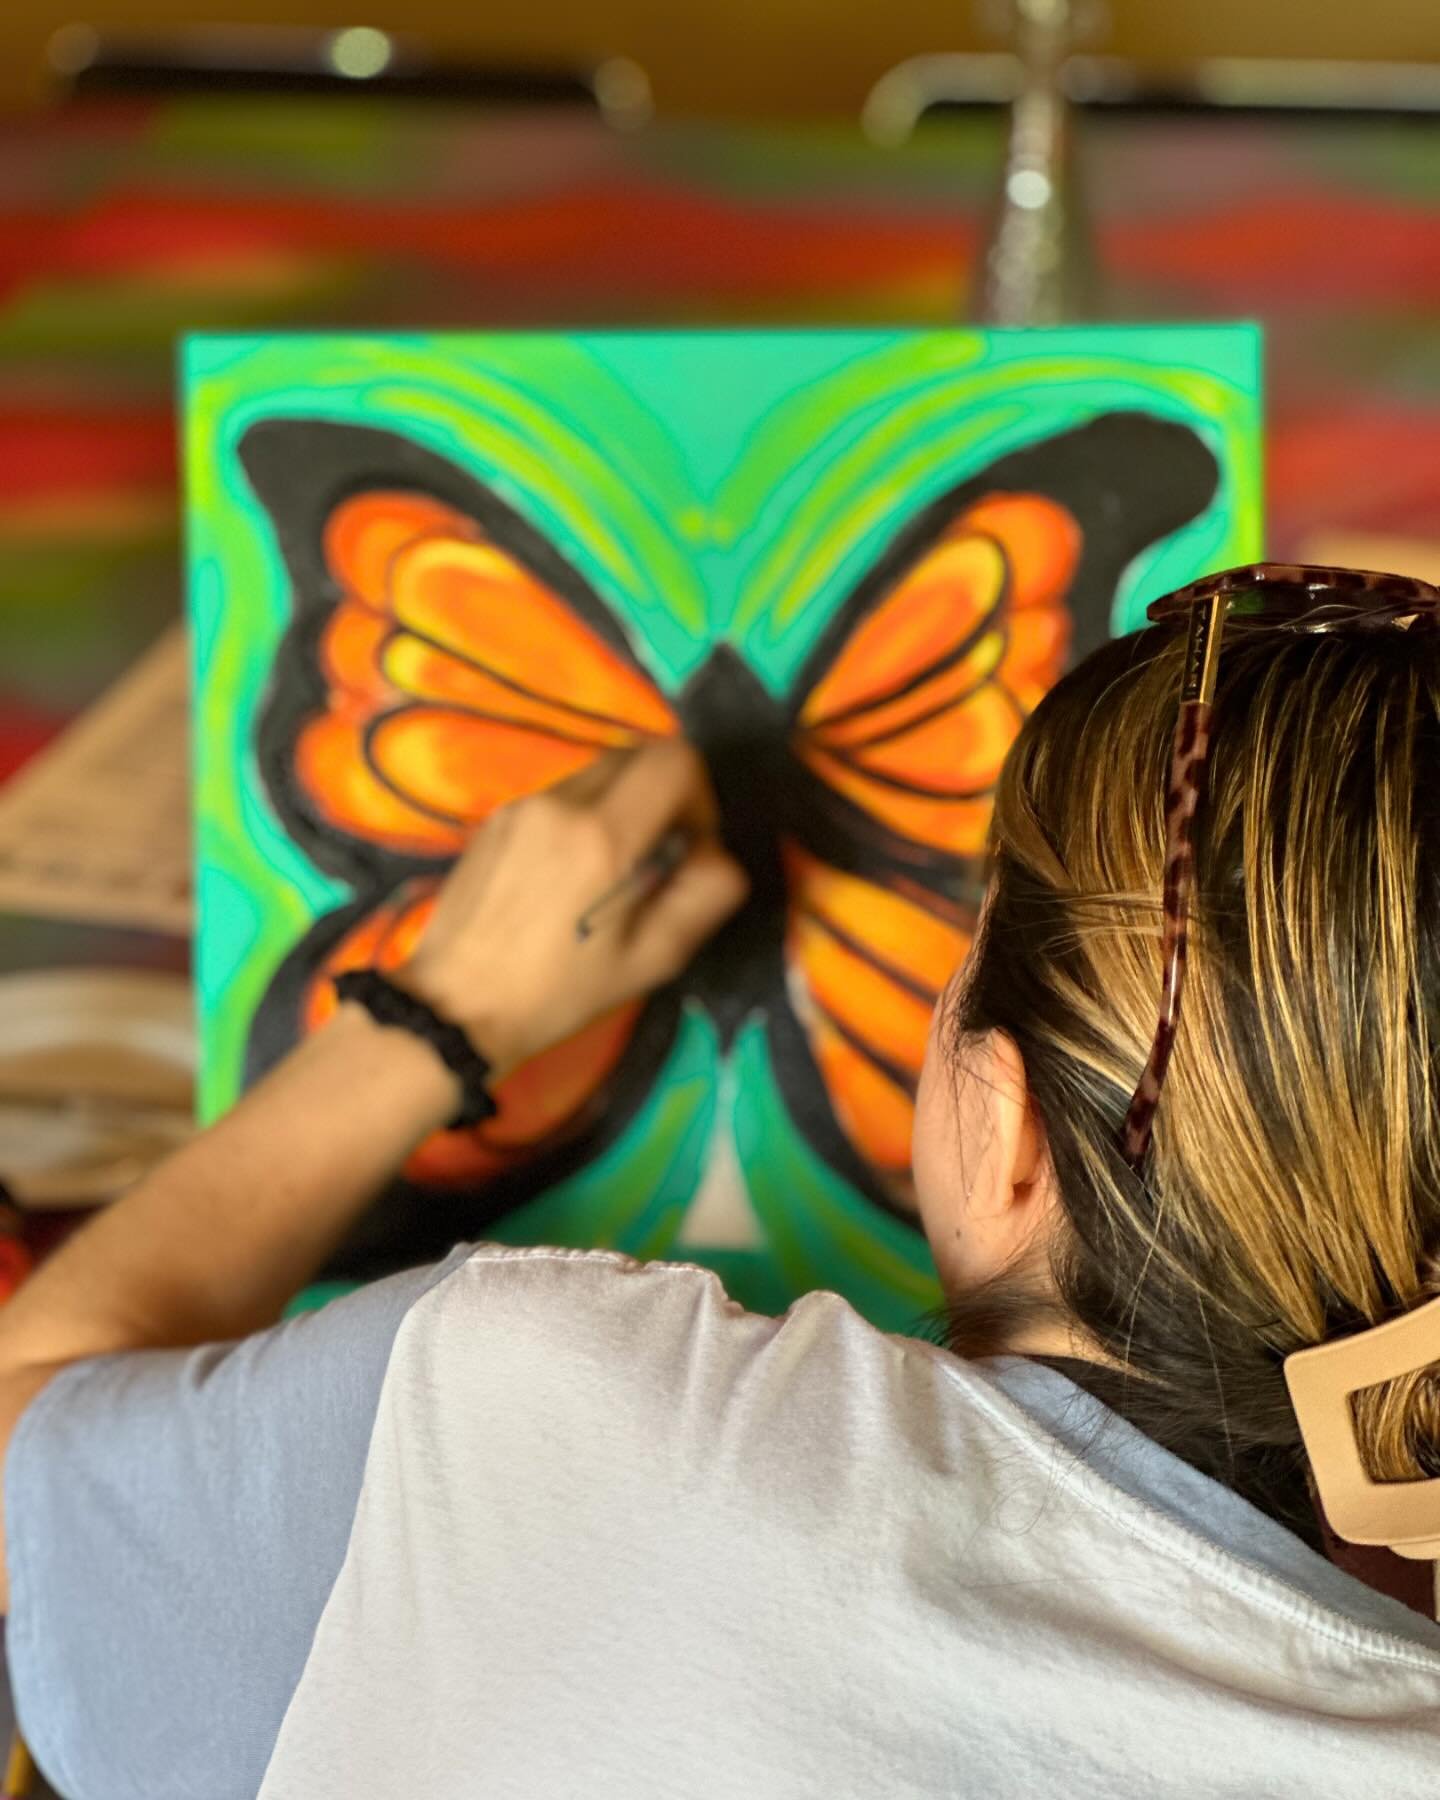 Our #sipandpaintpartyadc painters are loving their monarch butterflies! Register for our next @labuenapaintparties paint party on April 28 that is @elpasoopera themed! Register through the link in our bio. #farmersmarketatadc #farmersmarketatardovino